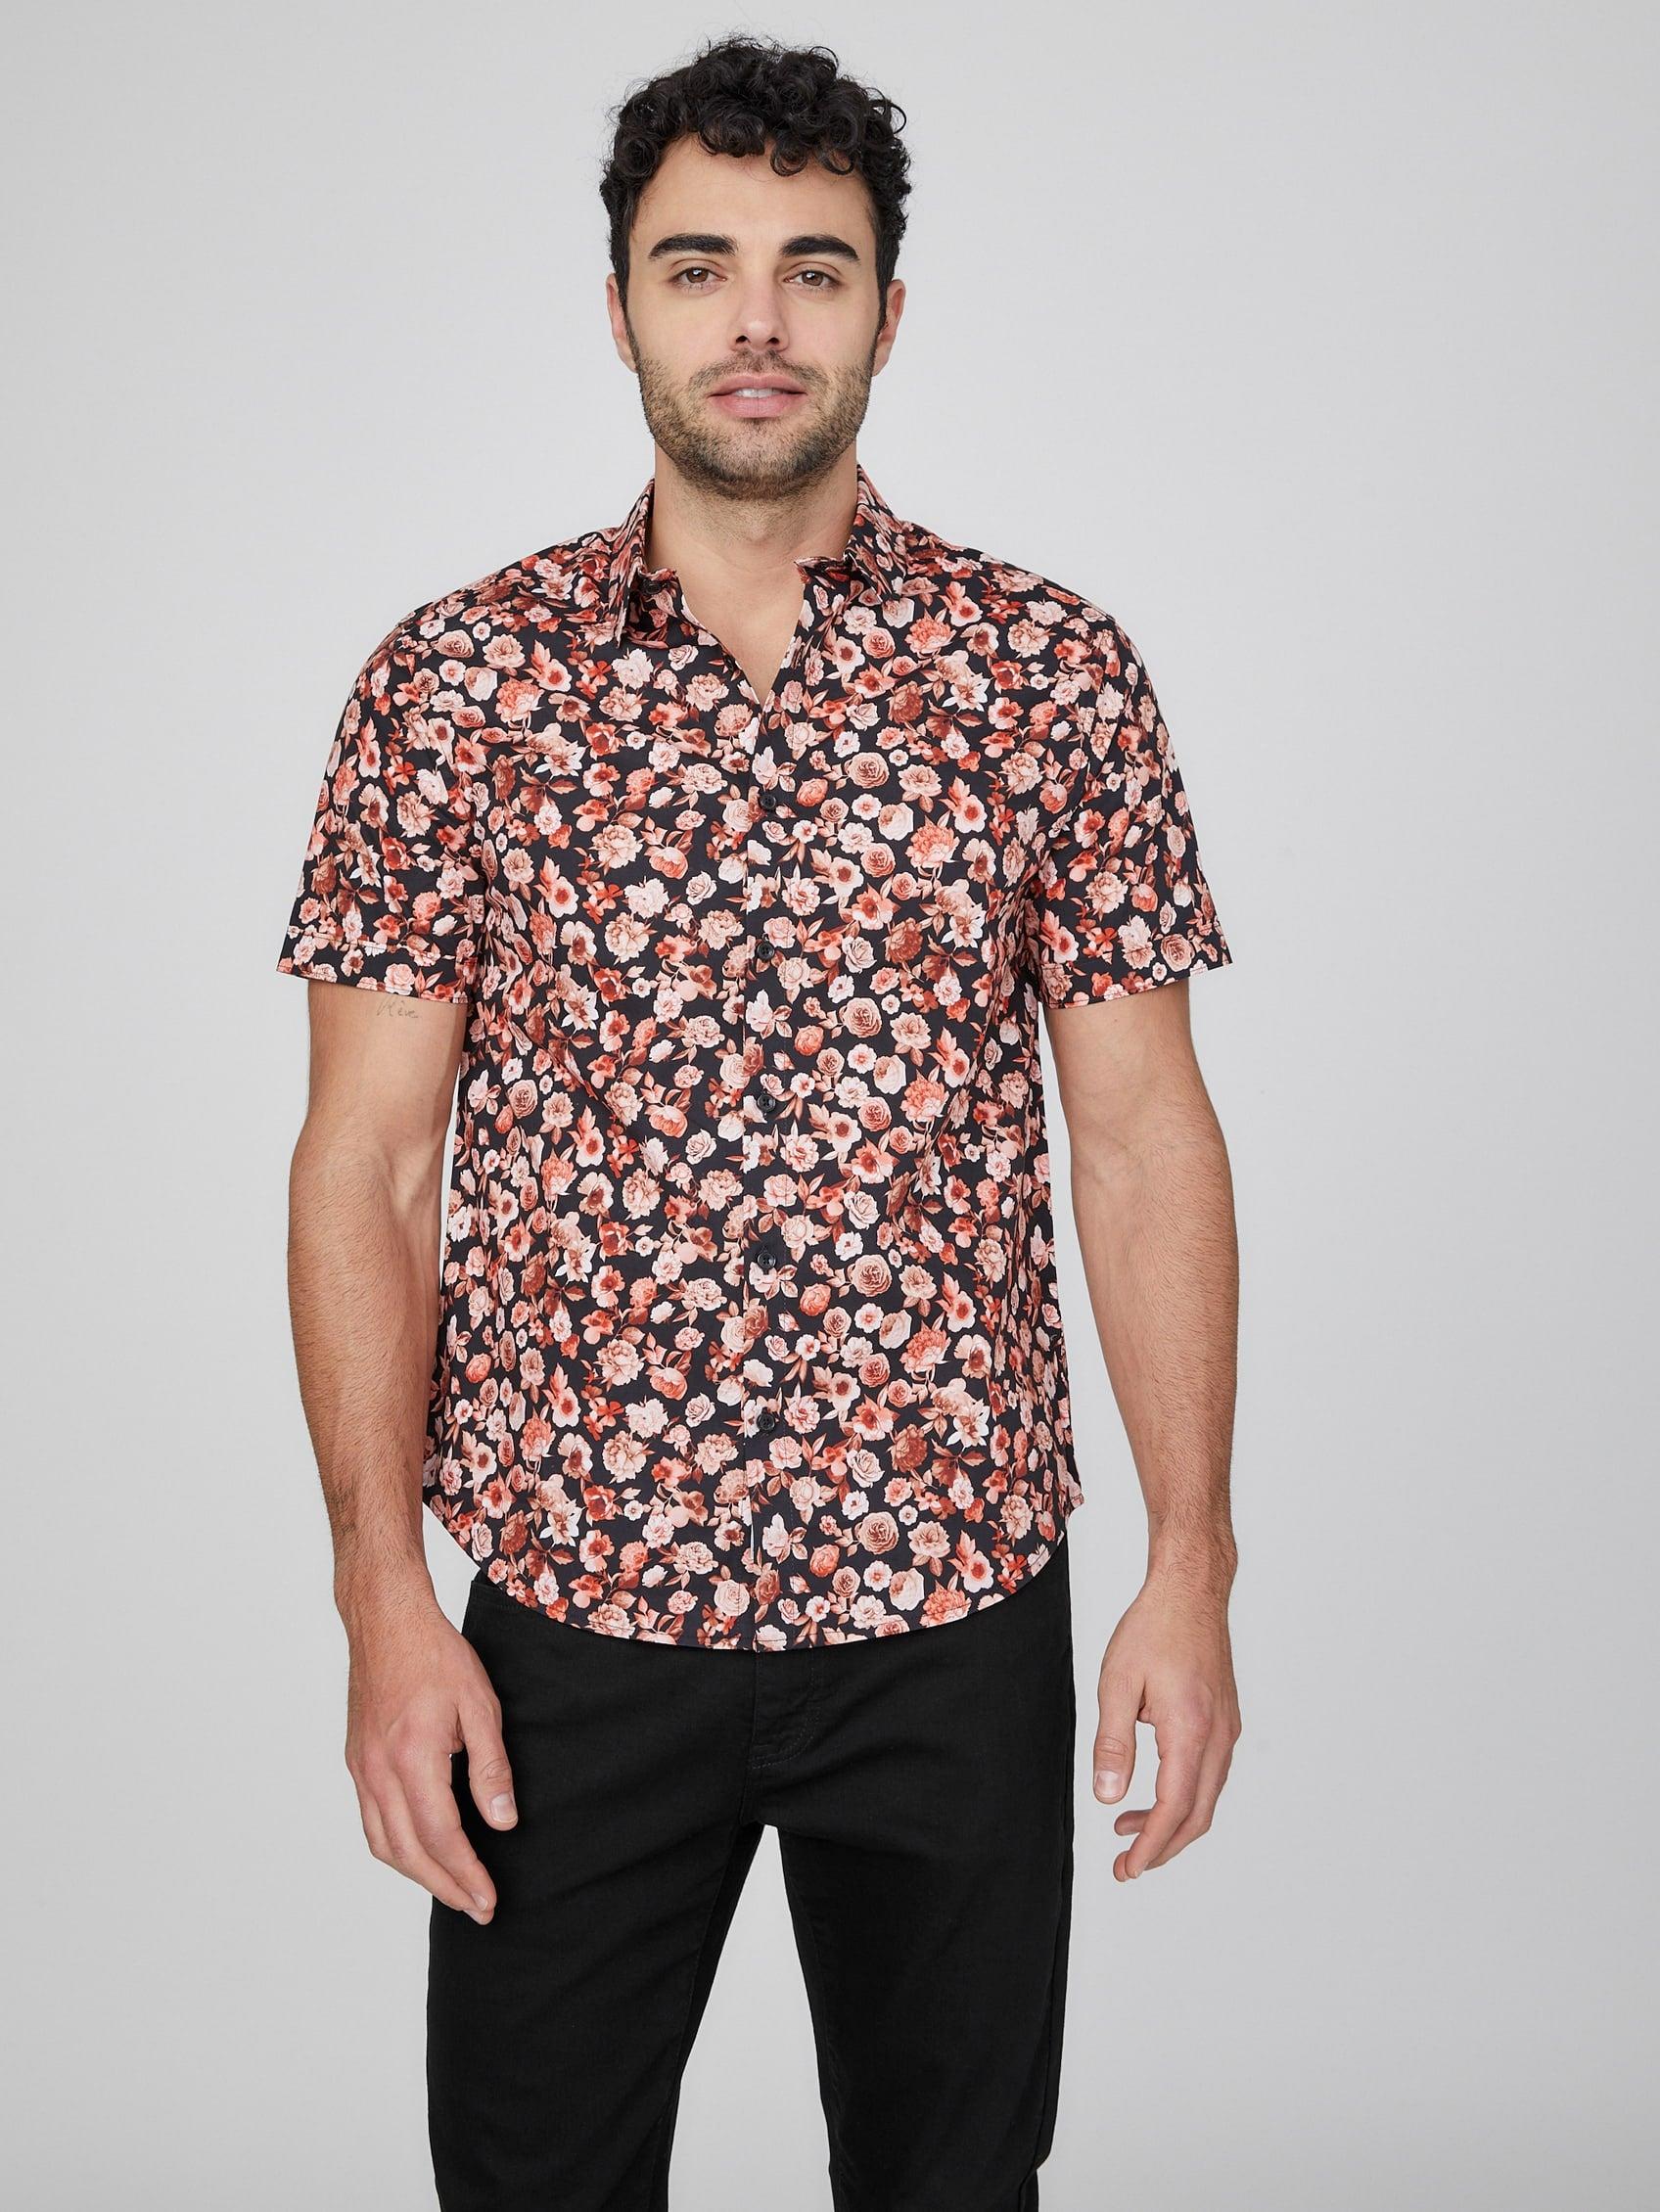 Guess Factory Ronaldo Floral Shirt in Red for Men | Lyst